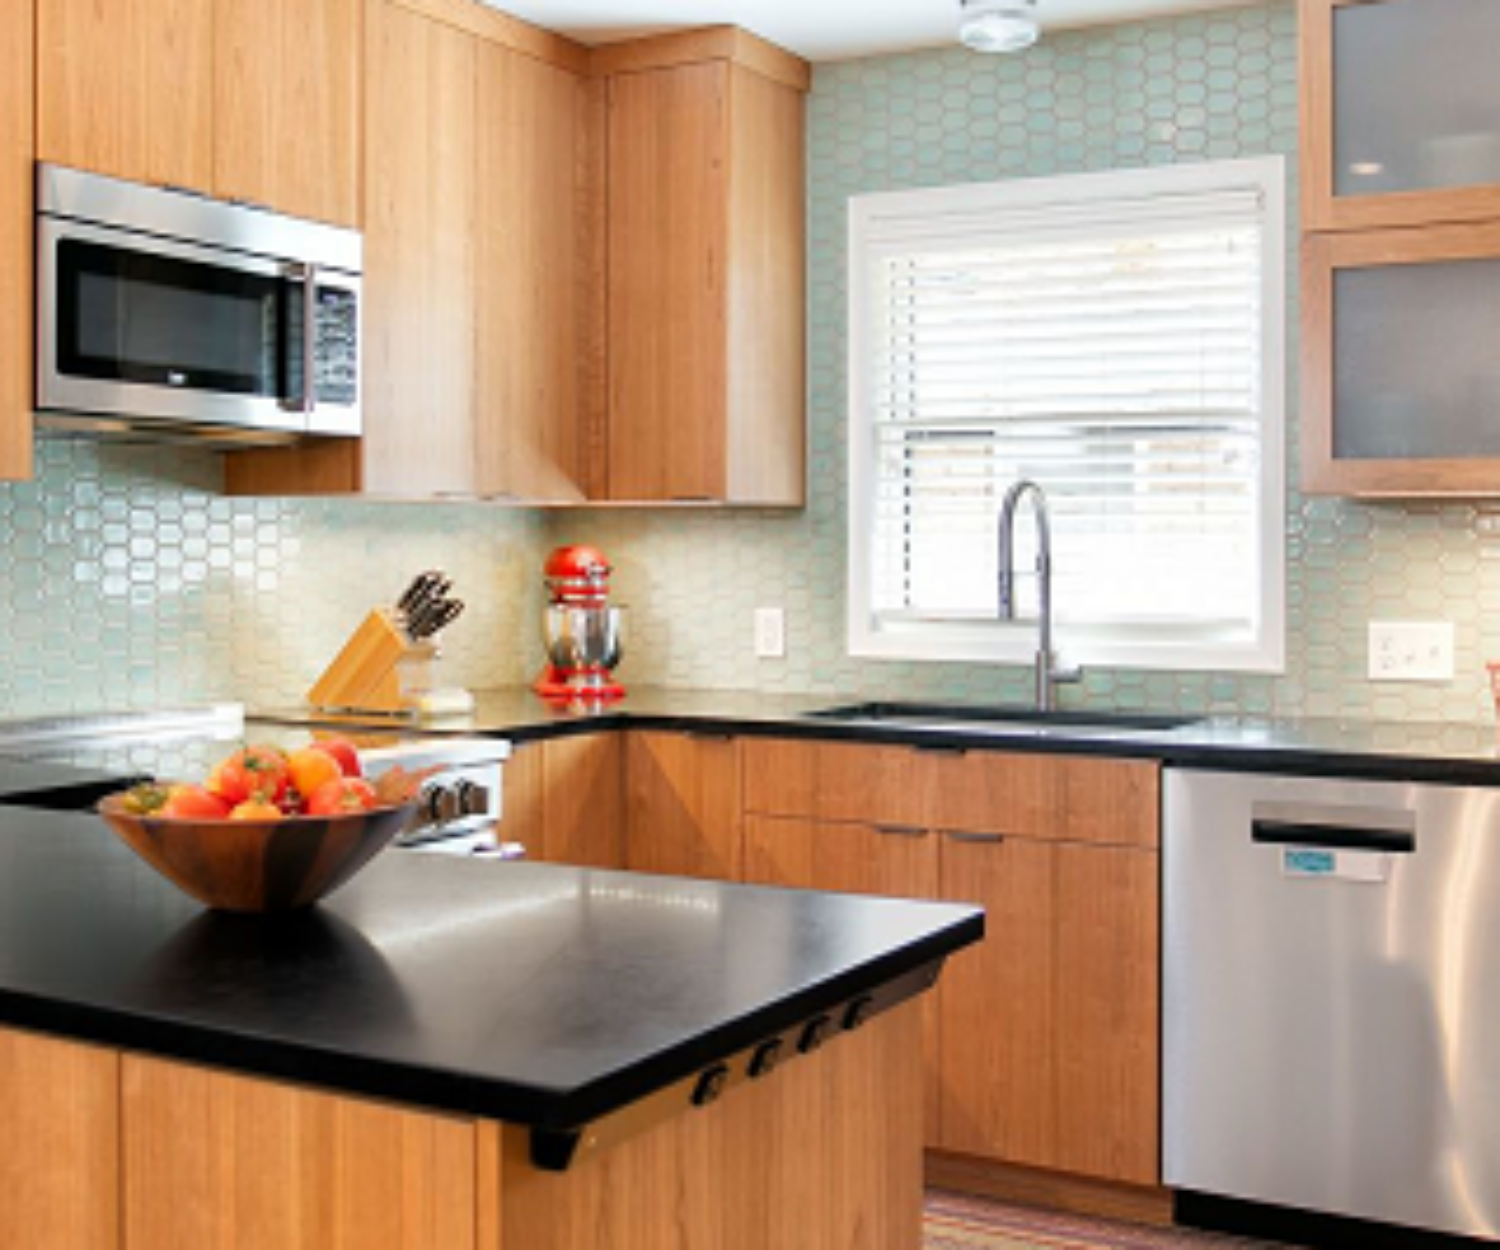 Kitchens | Castle Building & Remodeling, Inc. – Twin Cities Design ...